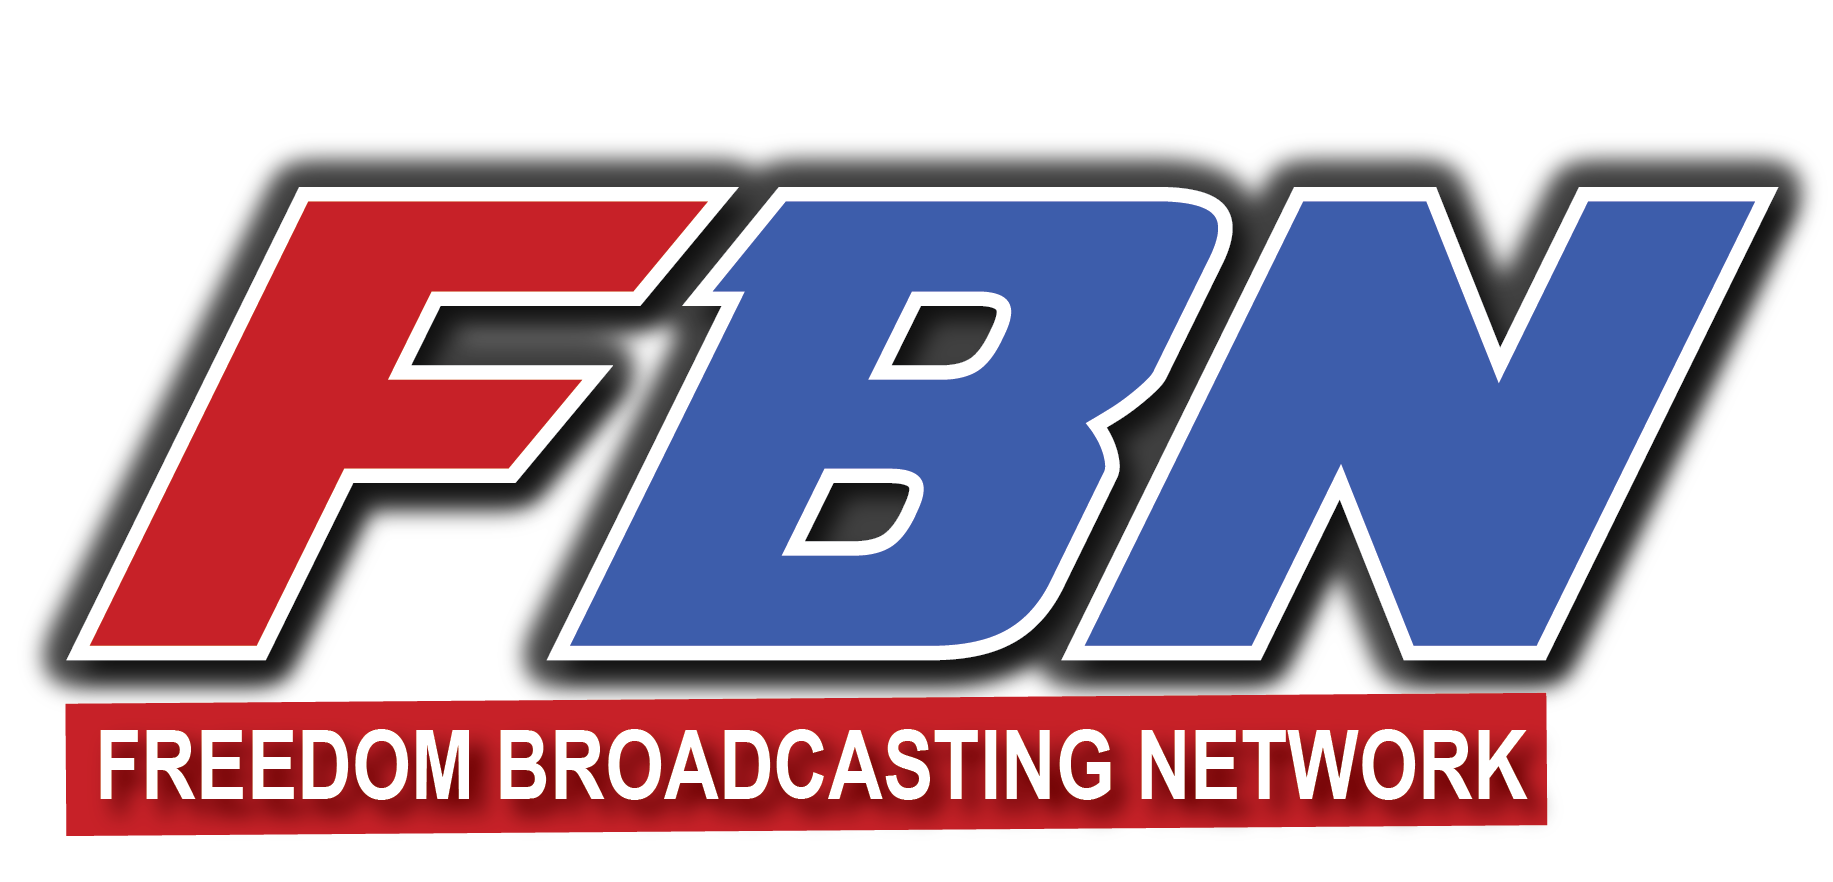 A logo for the radio broadcasting network fbn.